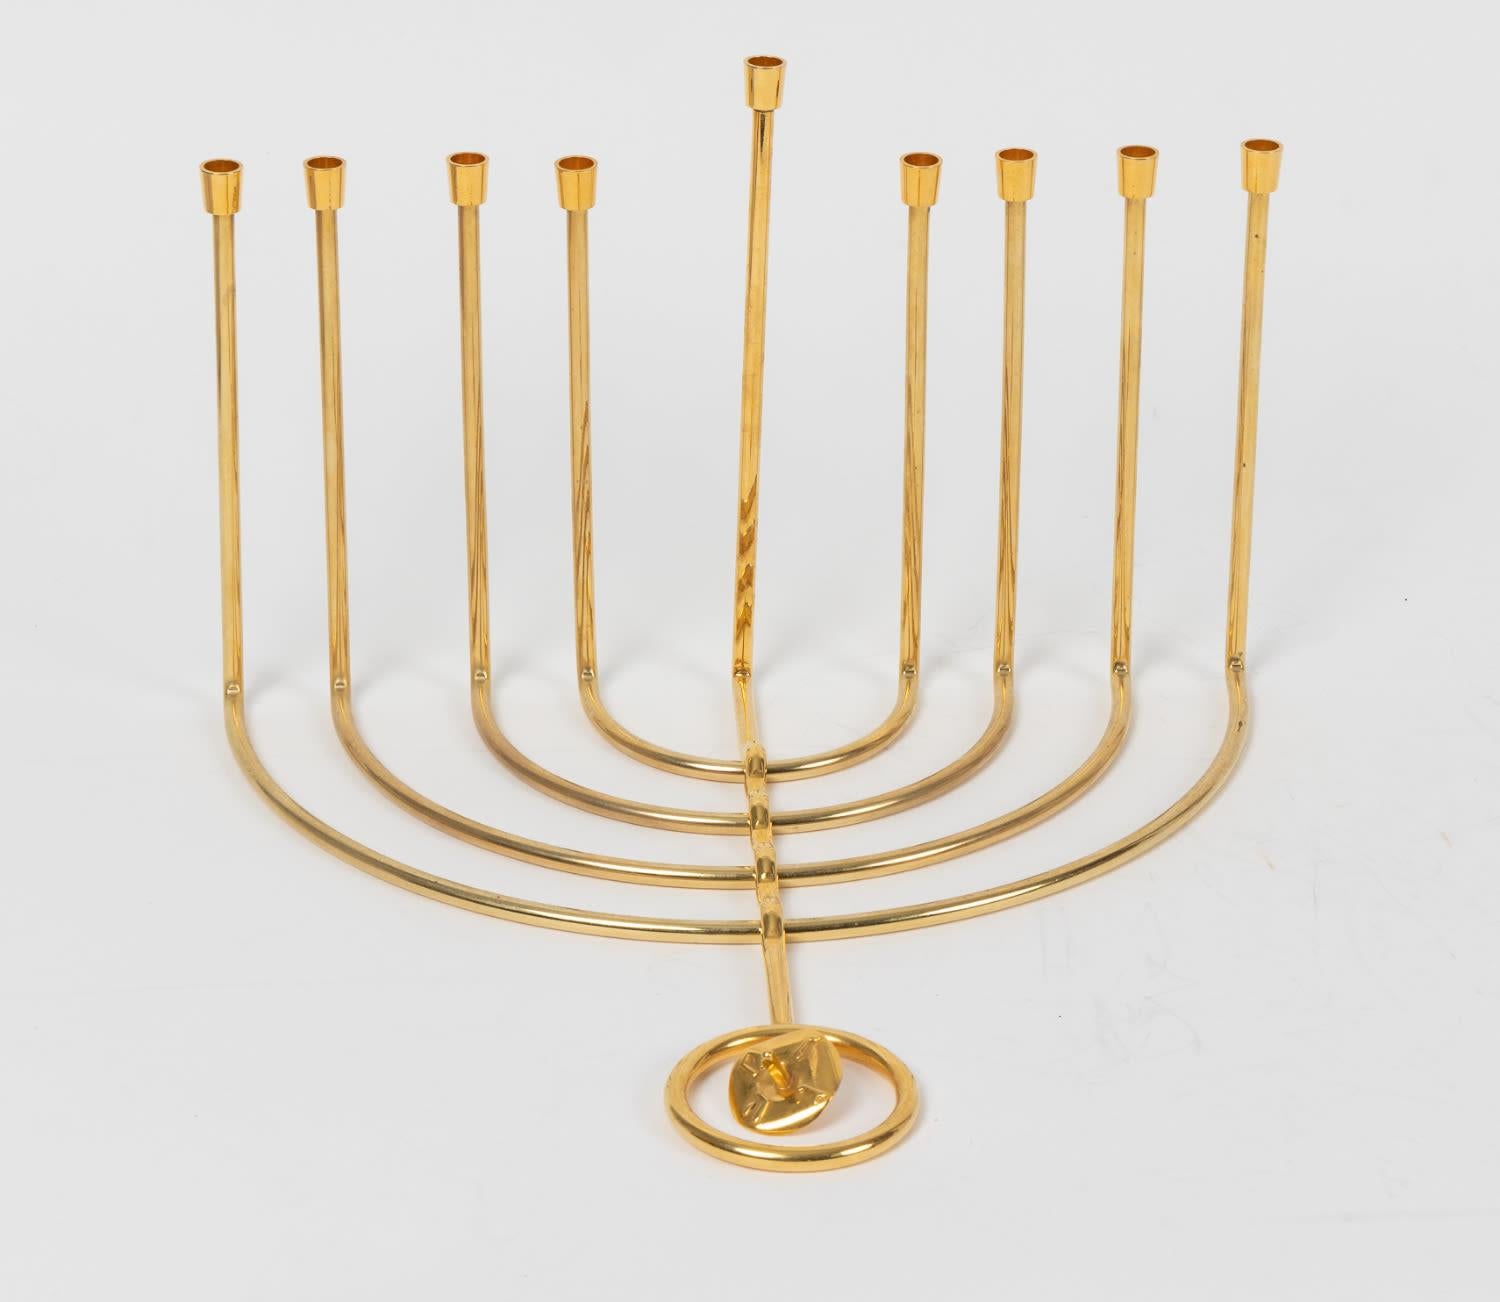 Modern Art: A Unique Chanukkiyah of gilt brass, by the Foremost Israeli Artist Moshe Zabari. Israel, 20th C.
Moshe Zabari, a foremost Israeli Judaica artist and graduate of the Bezalel Academy, was born in Jerusalem in 1935.



Zabari studied at the